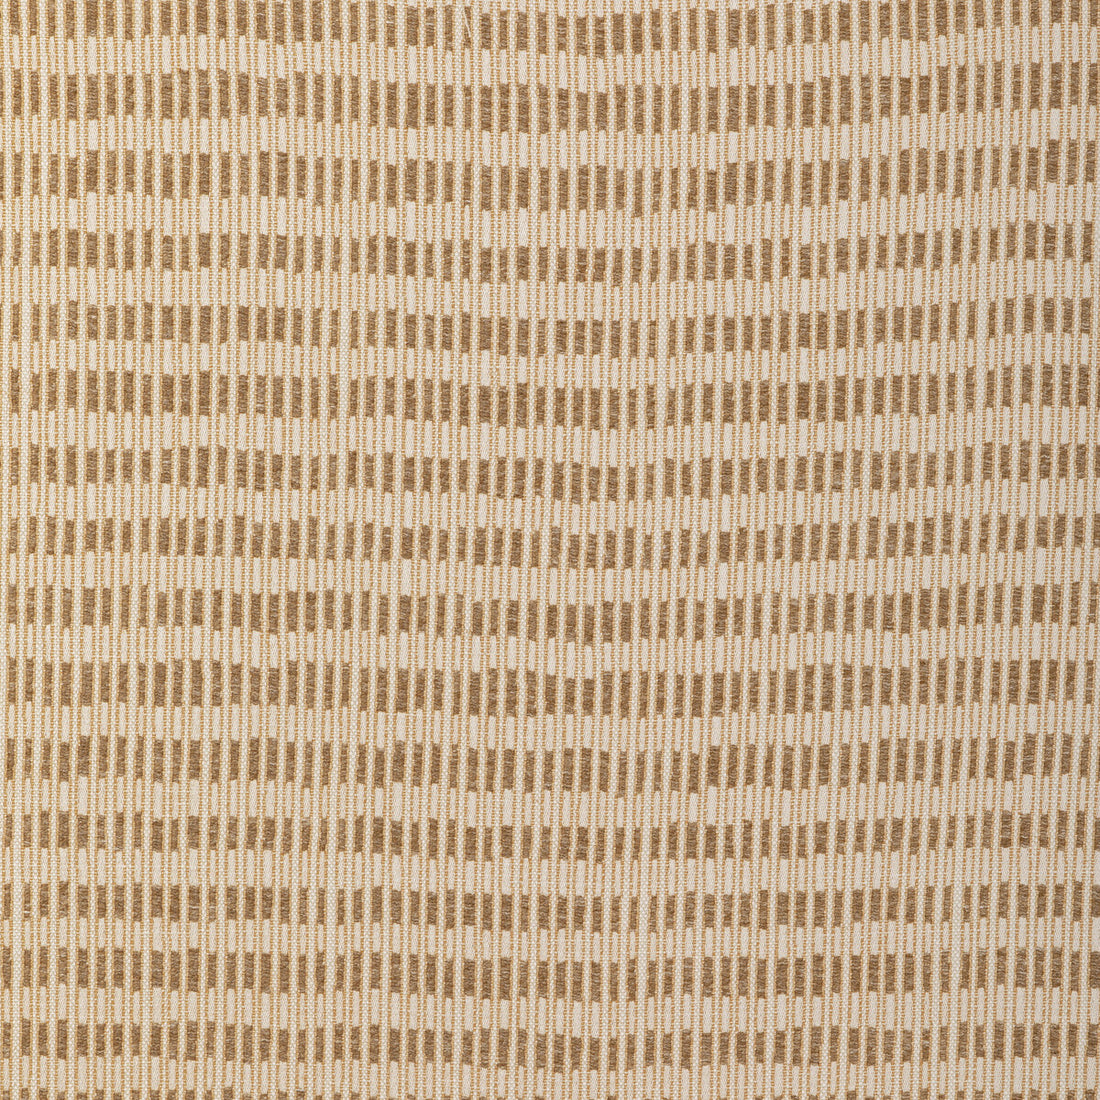 Baja fabric in coin color - pattern GWF-3797.416.0 - by Lee Jofa Modern in the Kelly Wearstler VIII collection